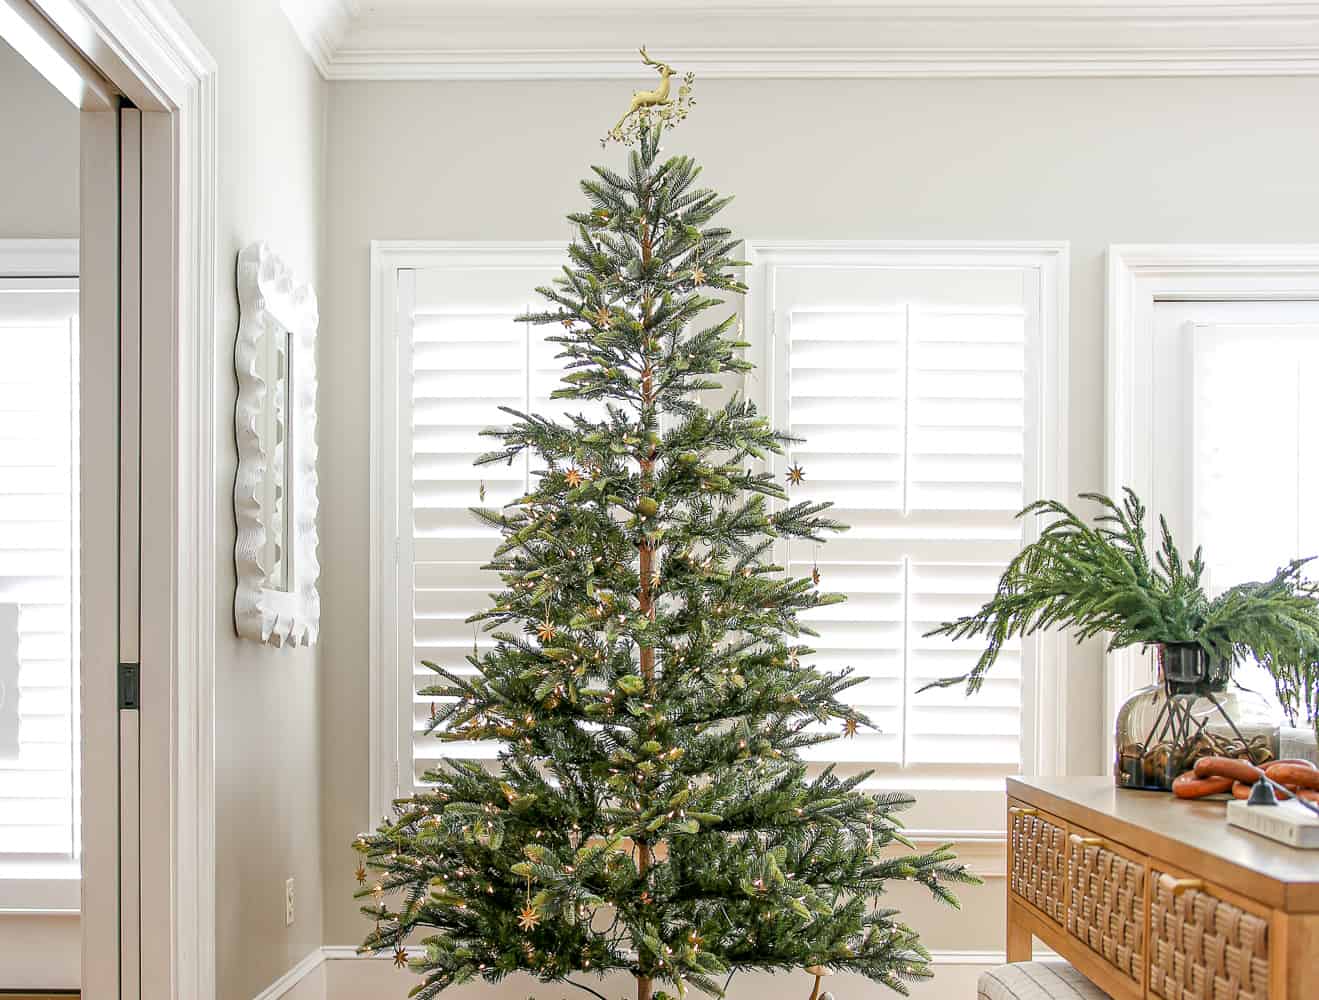 Is a Sparse Christmas Tree Right for You?